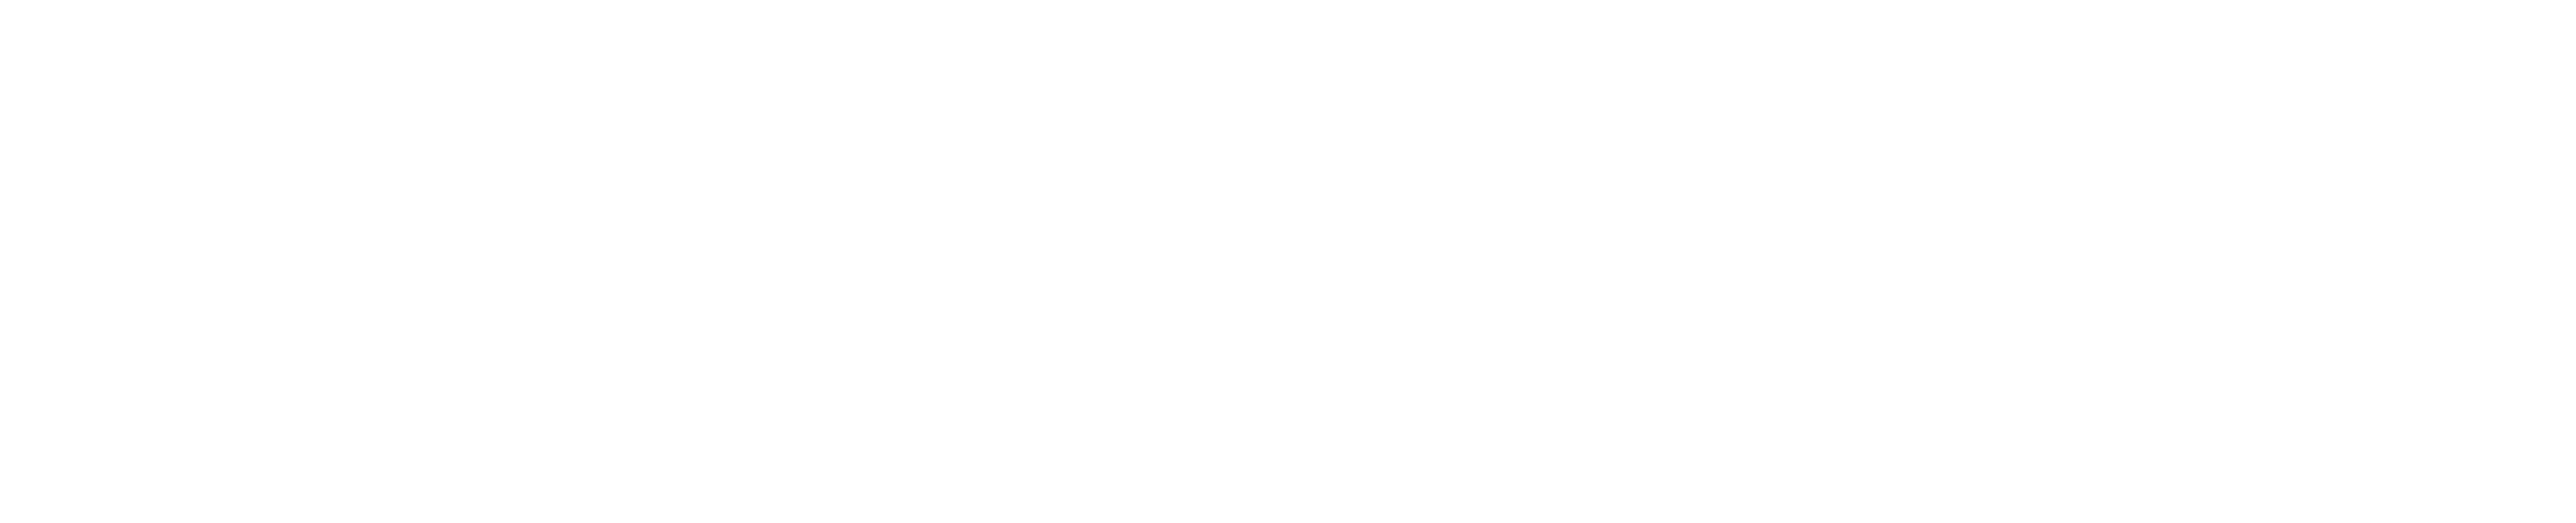 Greyscale official merchandise